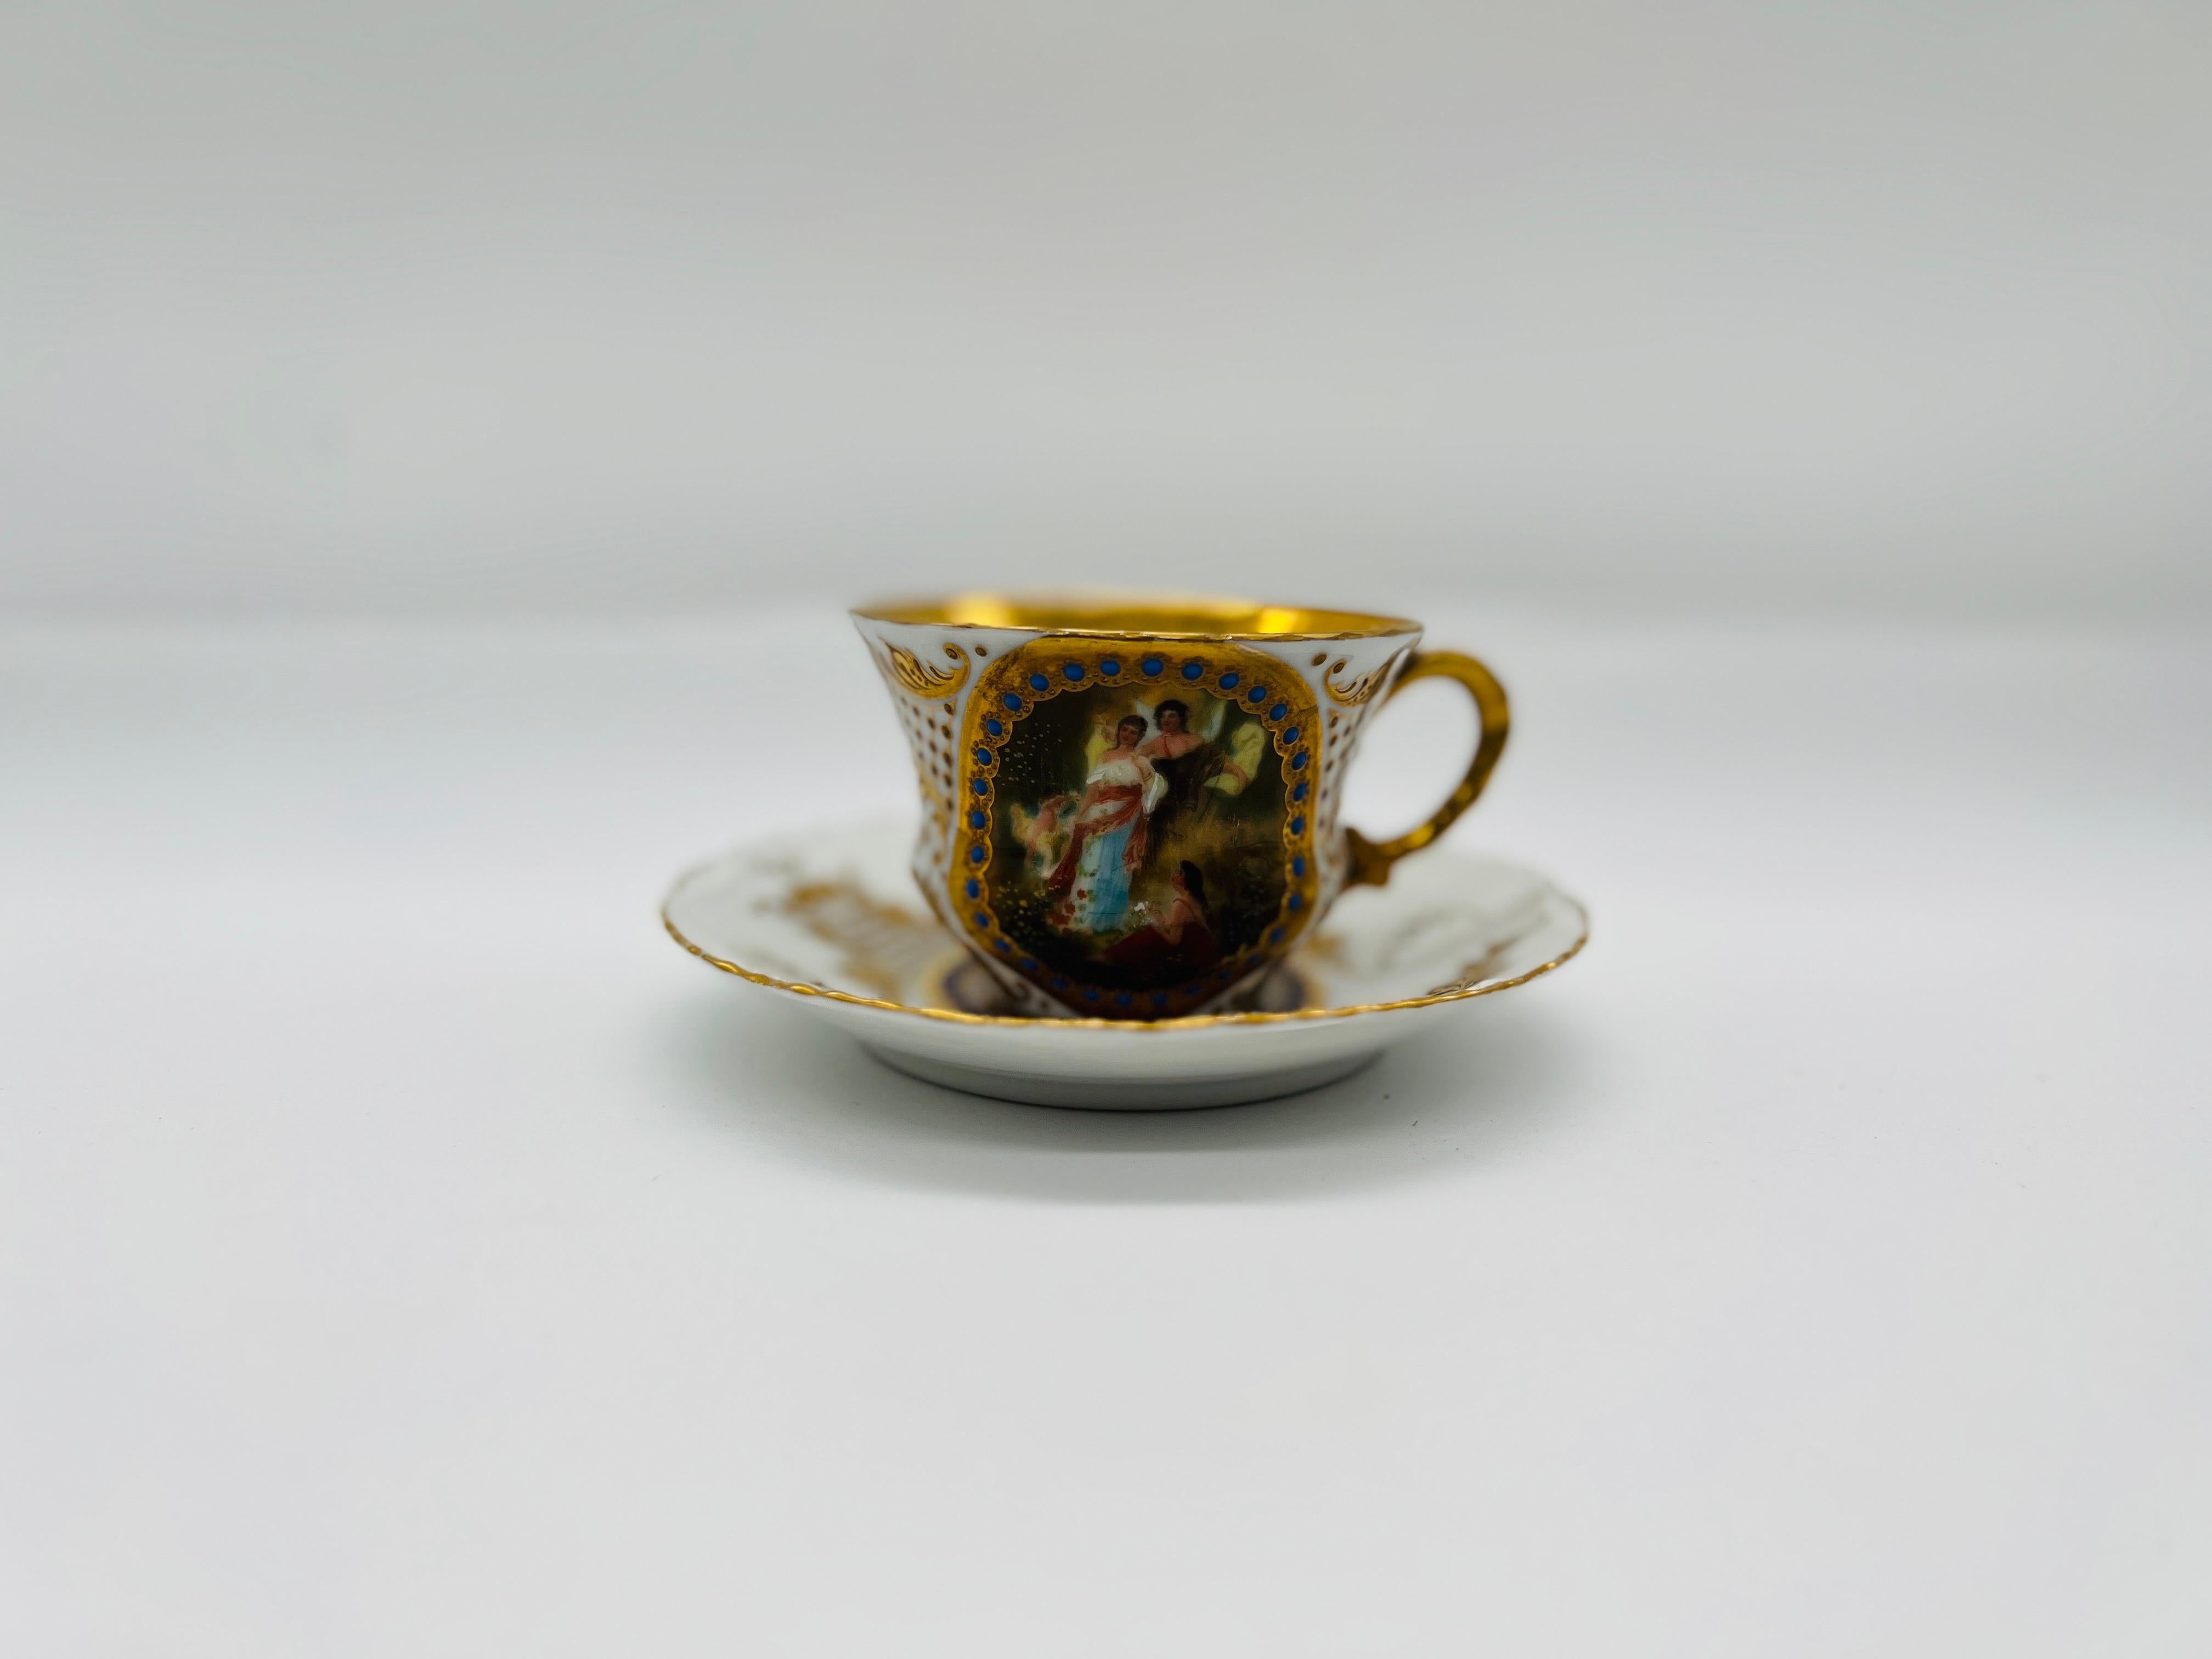 20th Century Royal Vienna Style Hand Painted Porcelain Teacup & Saucer